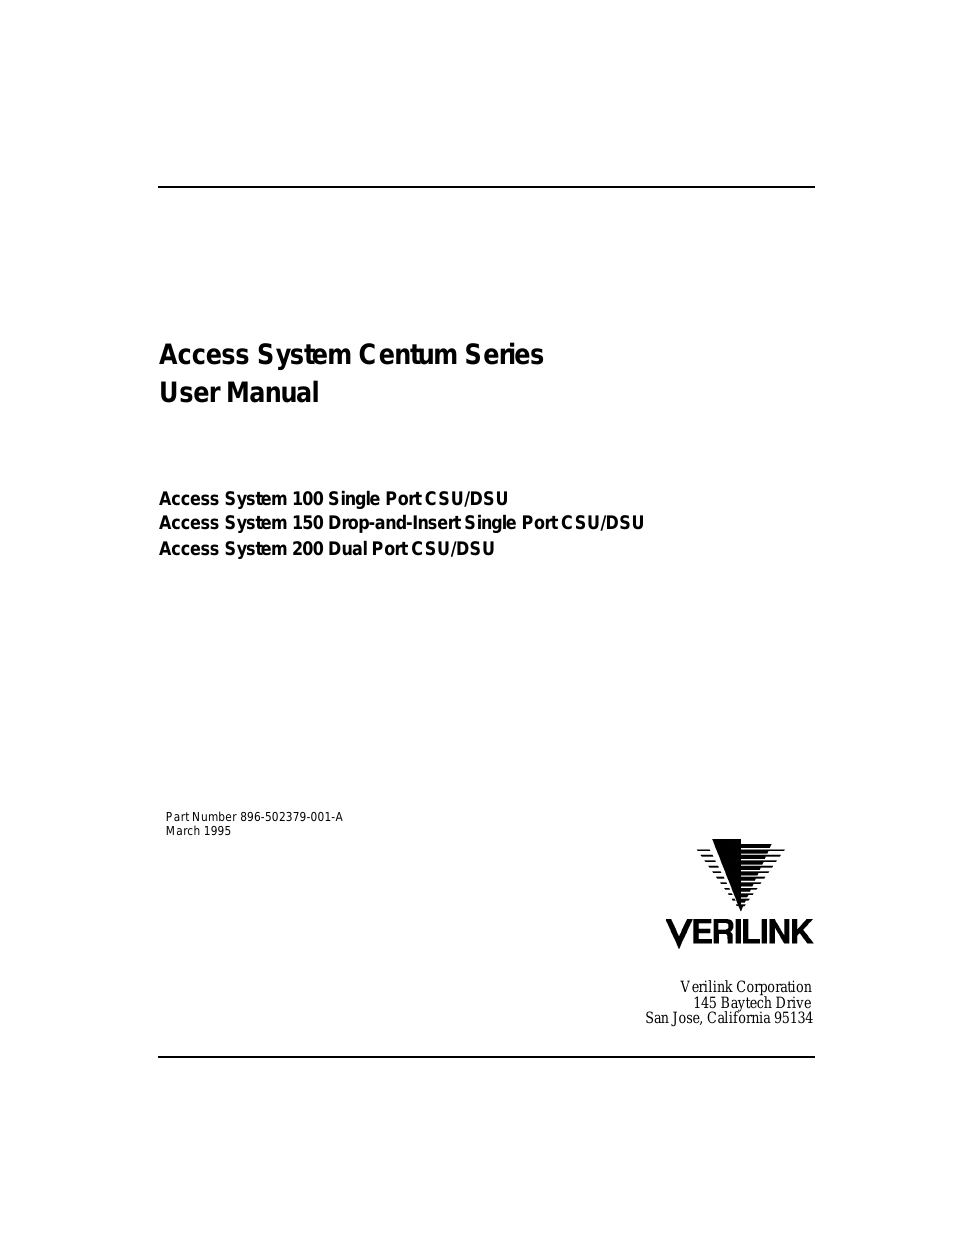 AS200 (896-502379-001) Product Manual